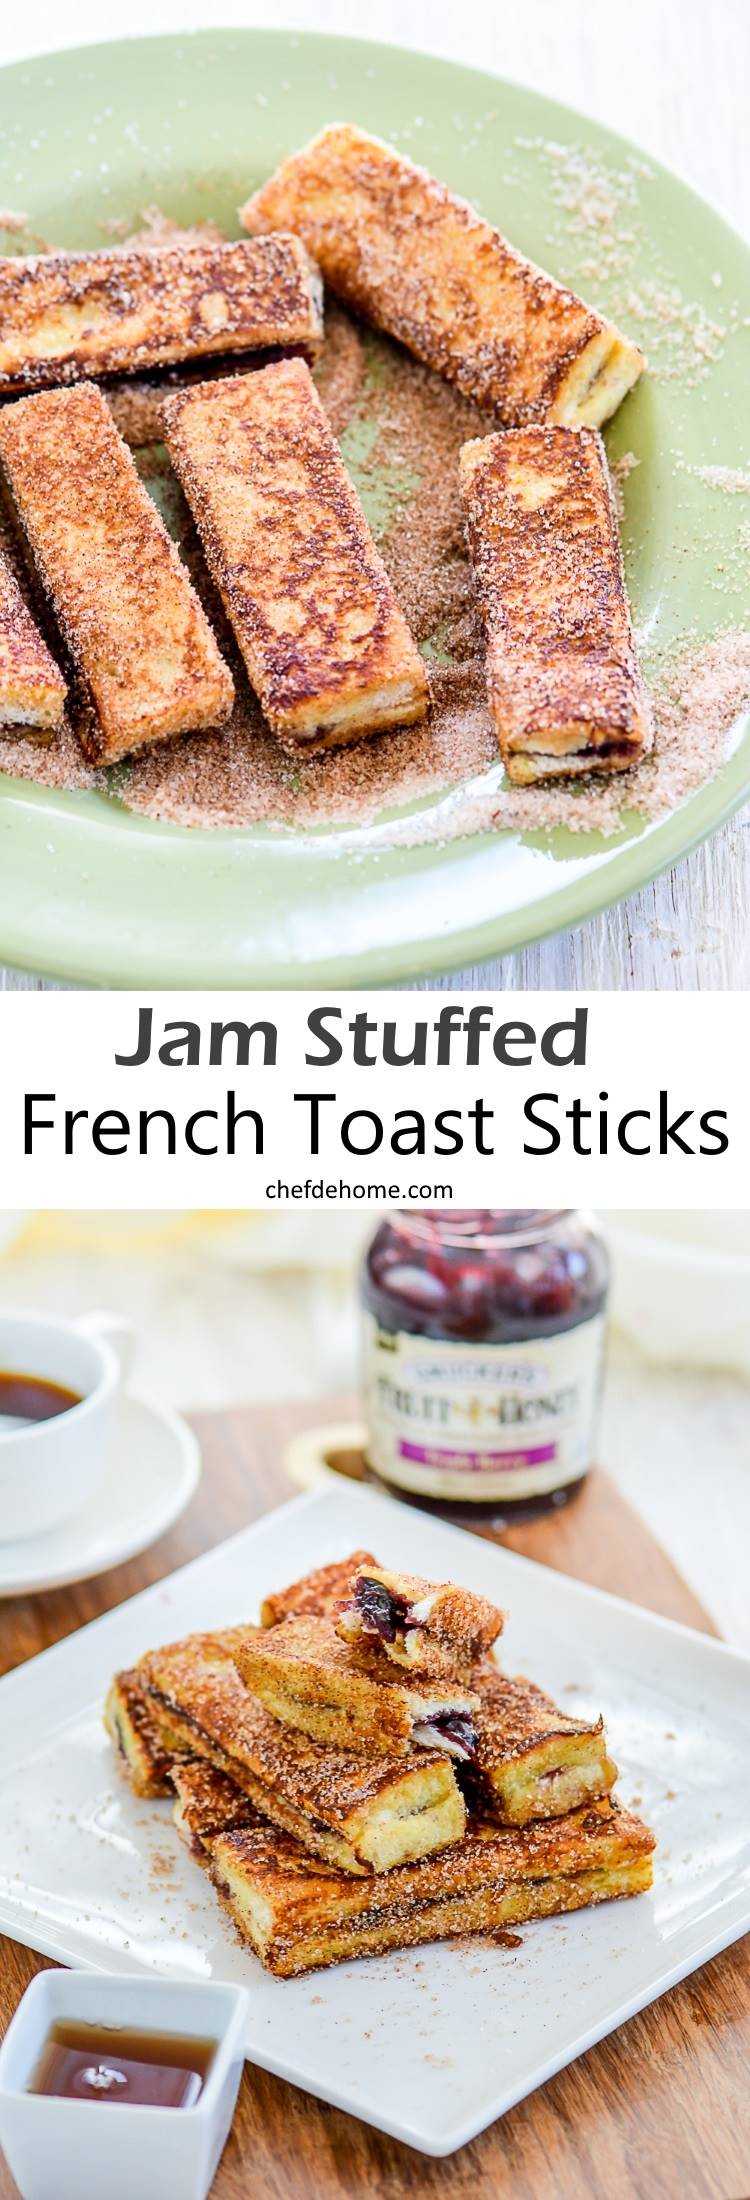 Fruit Jam Stuffed French Toast Bread Sticks for easy snacking | chefdehome.com